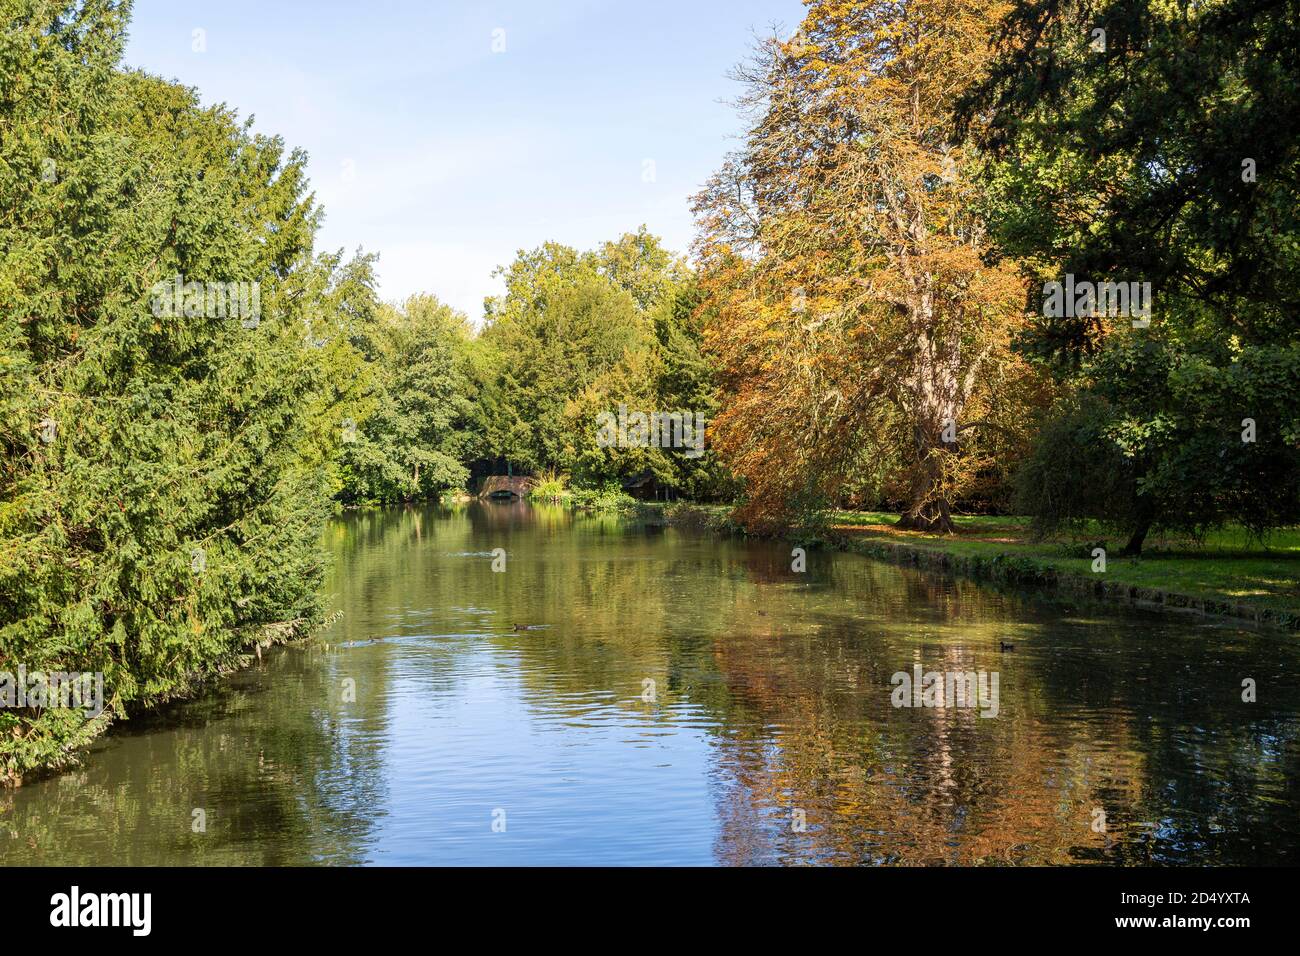 River Granta autumn tree colour, Audley End House and Gardens, Essex, England, UK Stock Photo